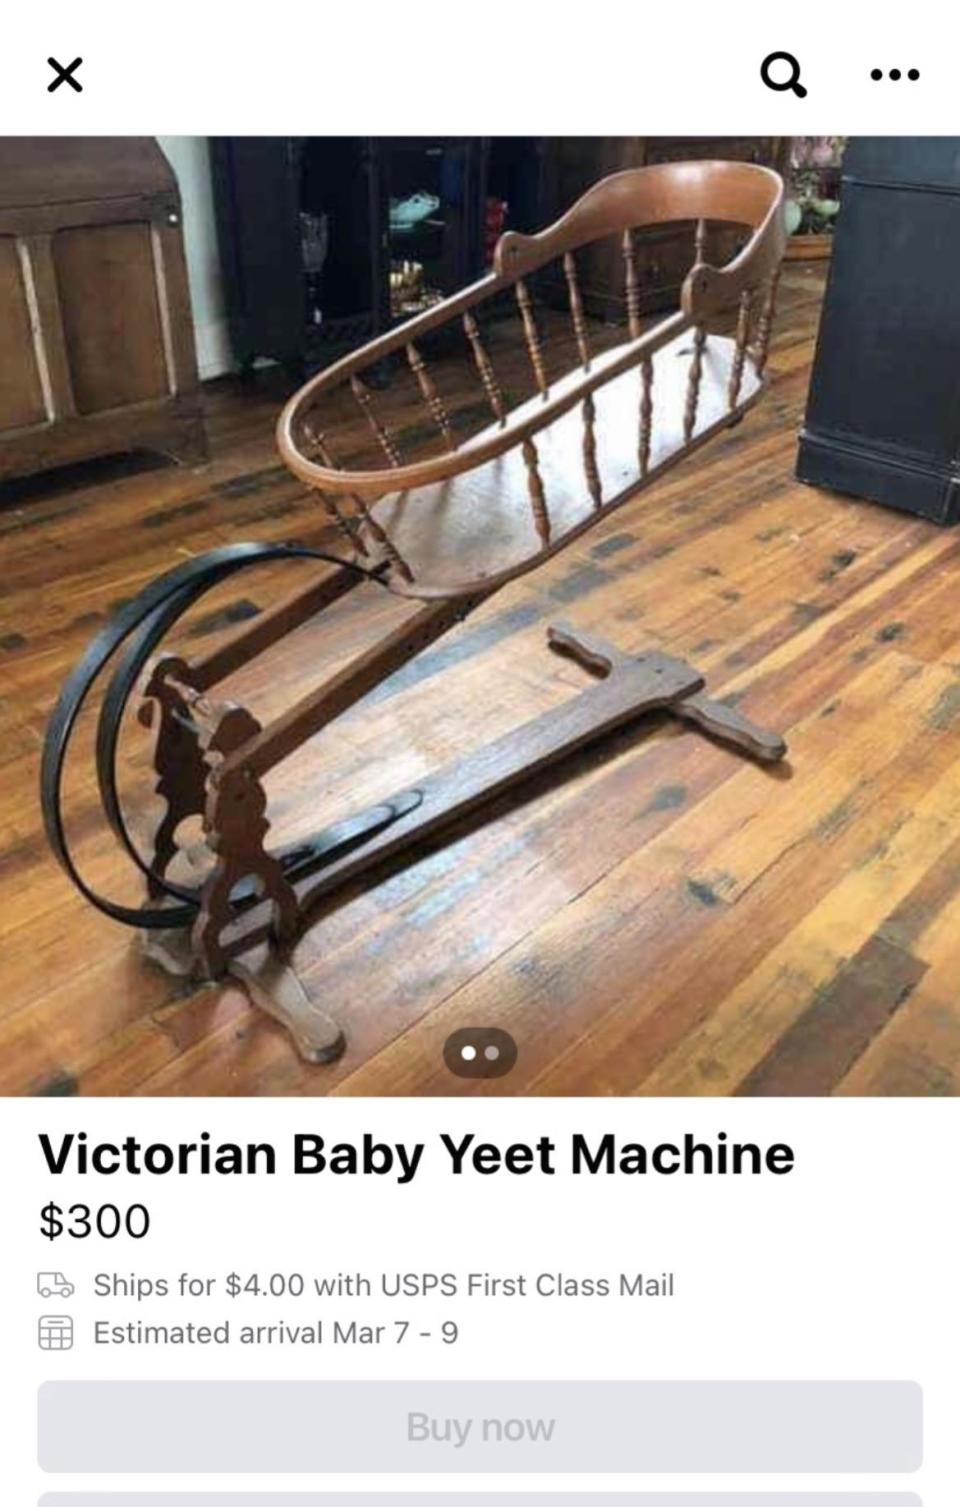 Antique rocking baby cradle for sale, labeled as "Victorian Baby Yeet Machine." Price listed at $300